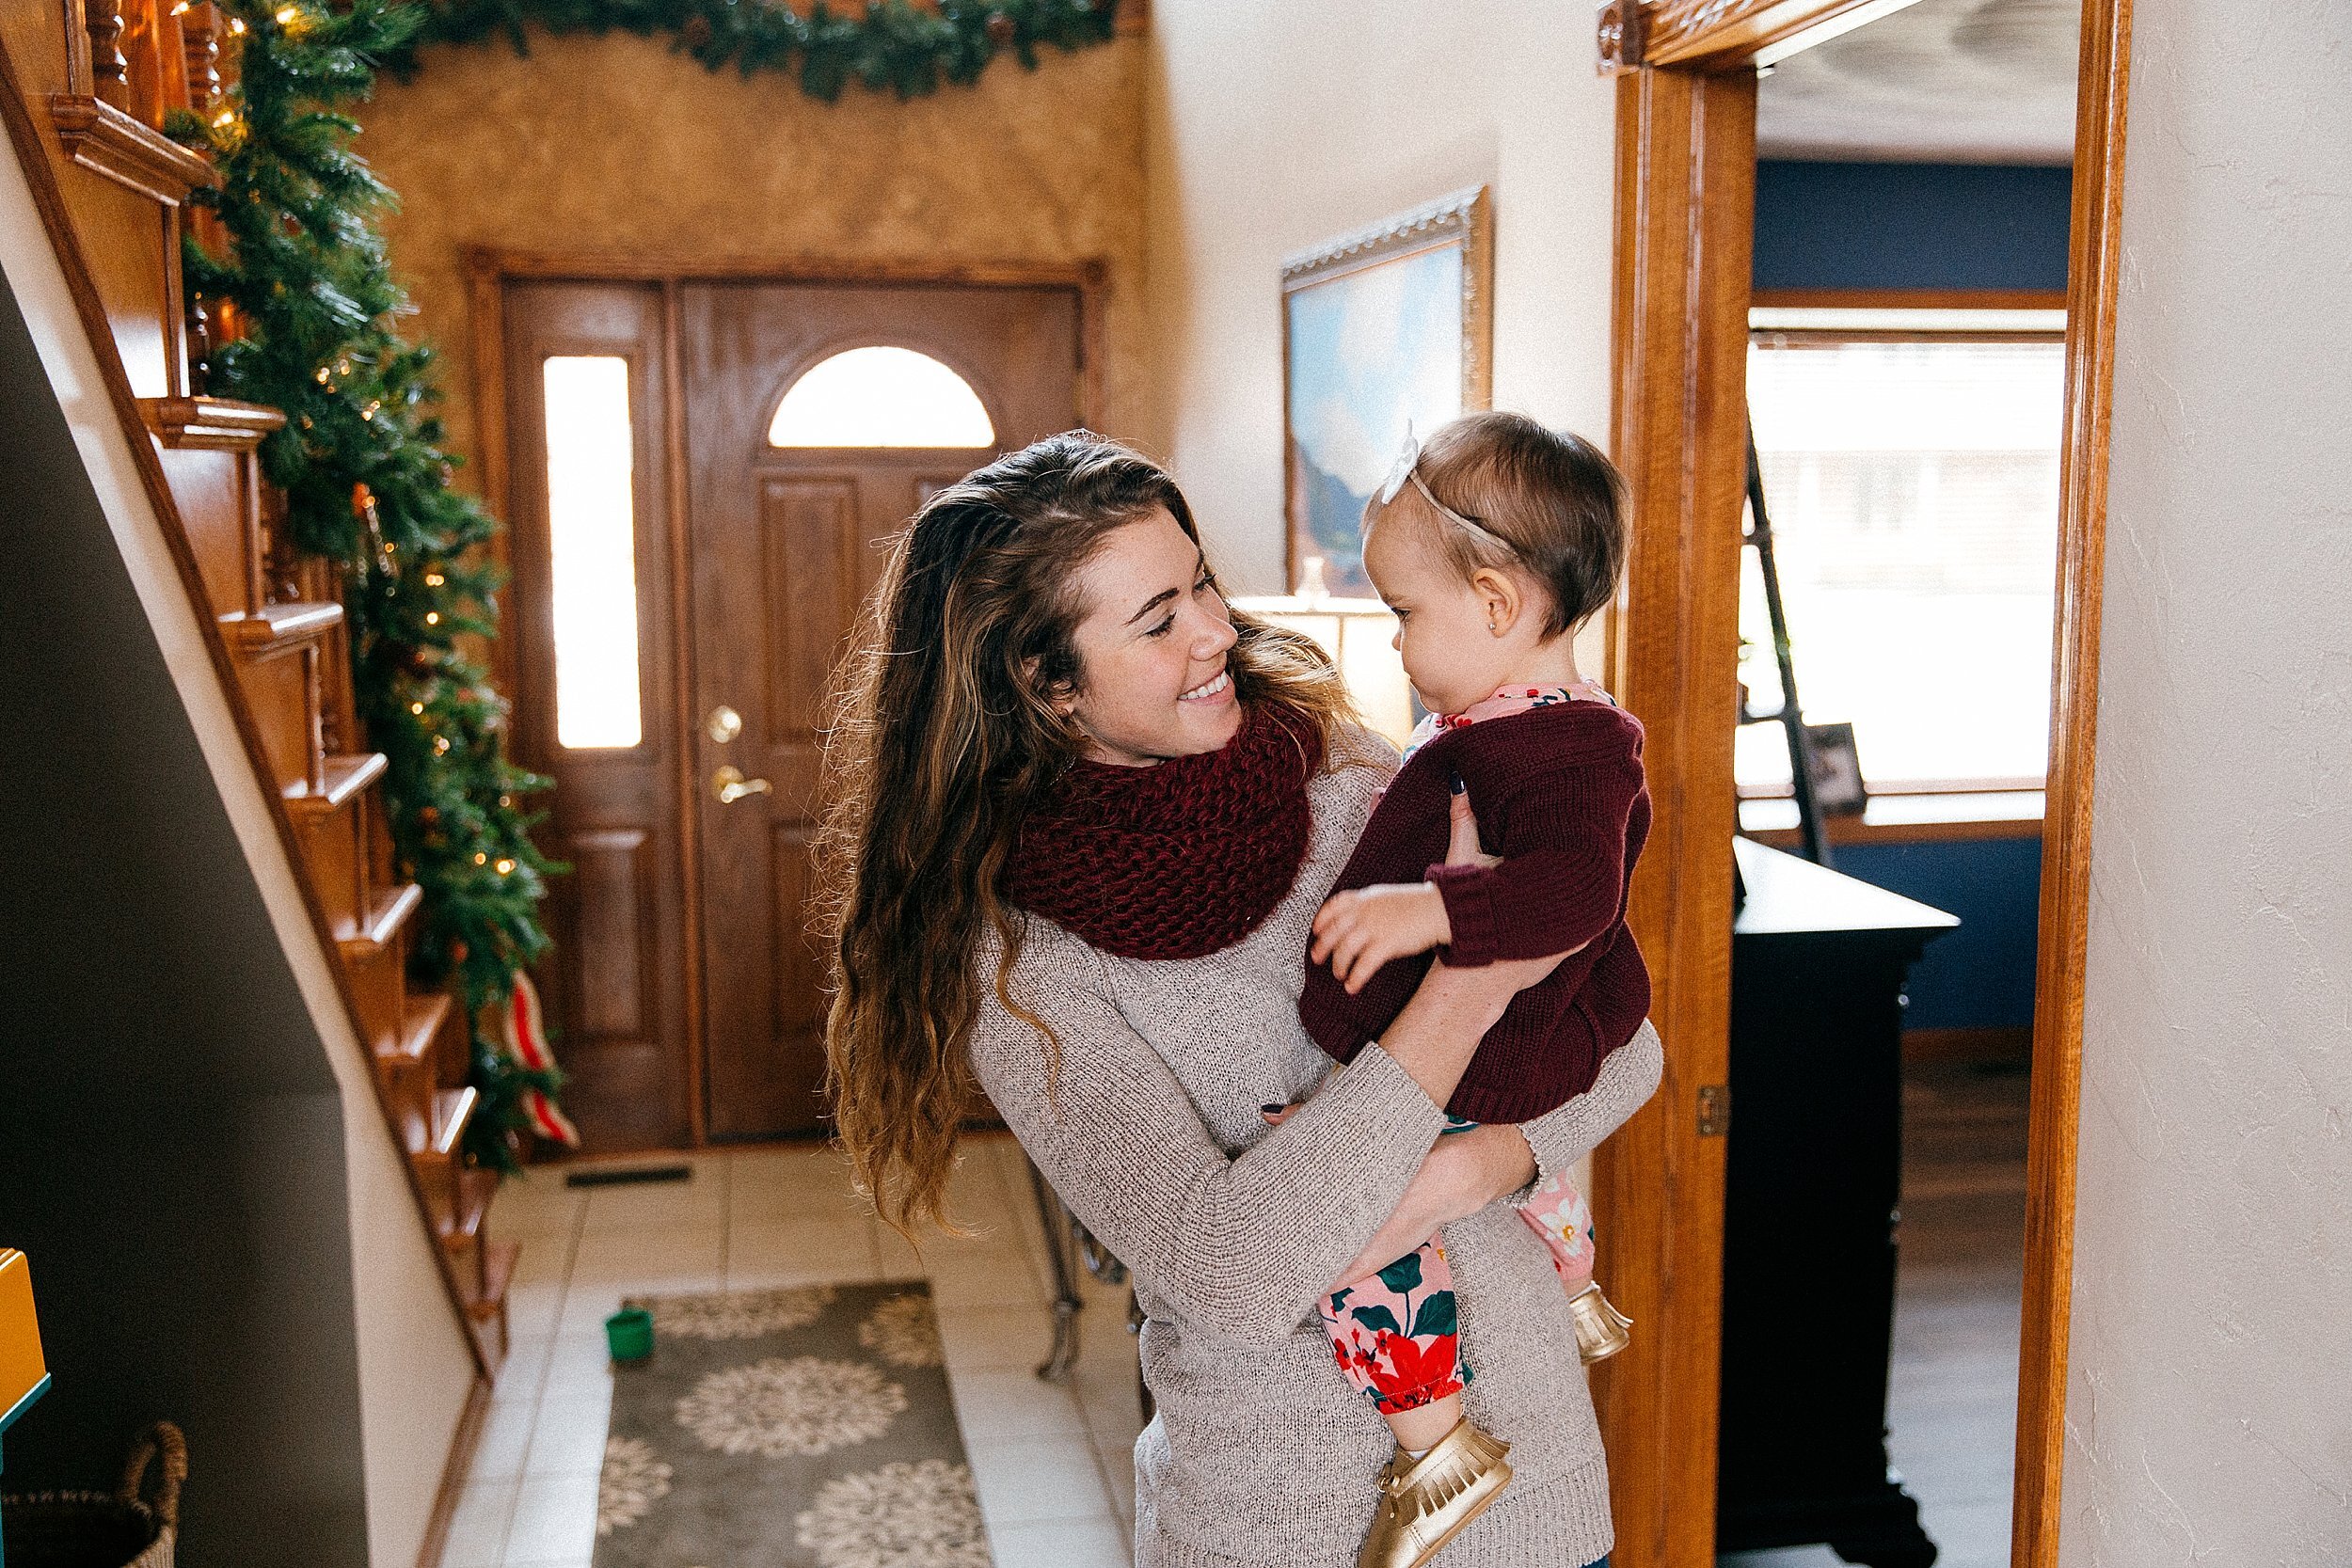  Our Life Journal - Christmas in Ohio 2019 